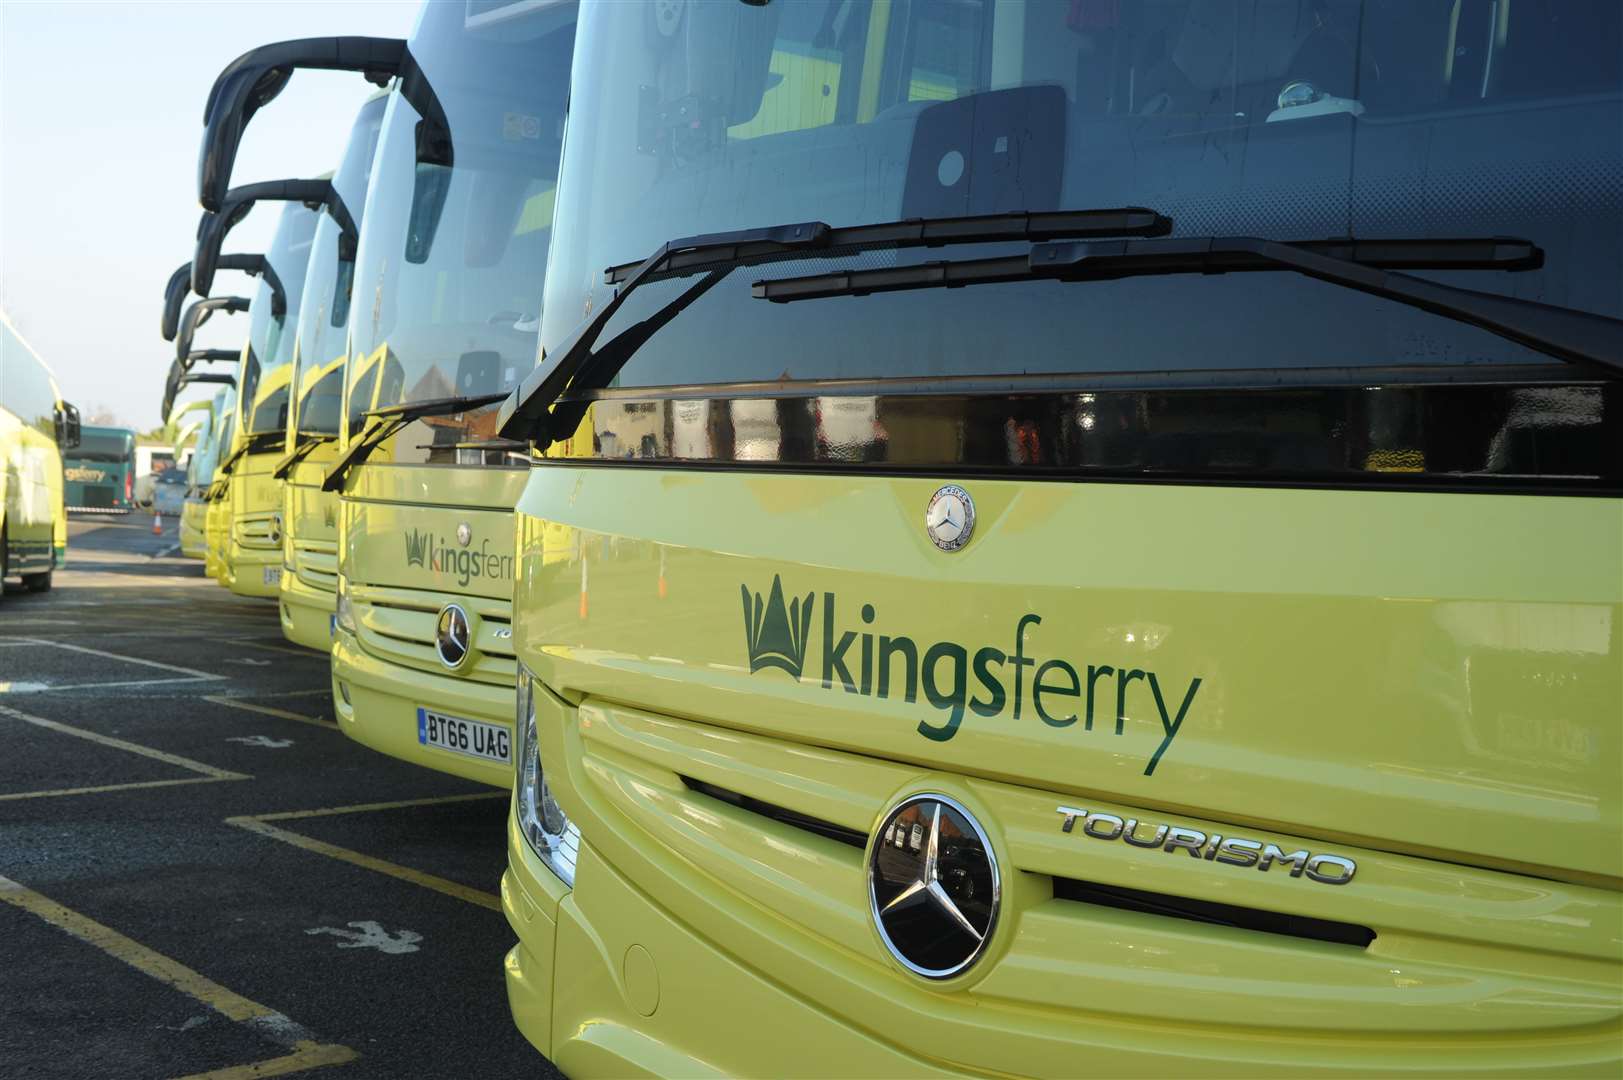 The Kings Ferry Kent to London commuter service was axed last month